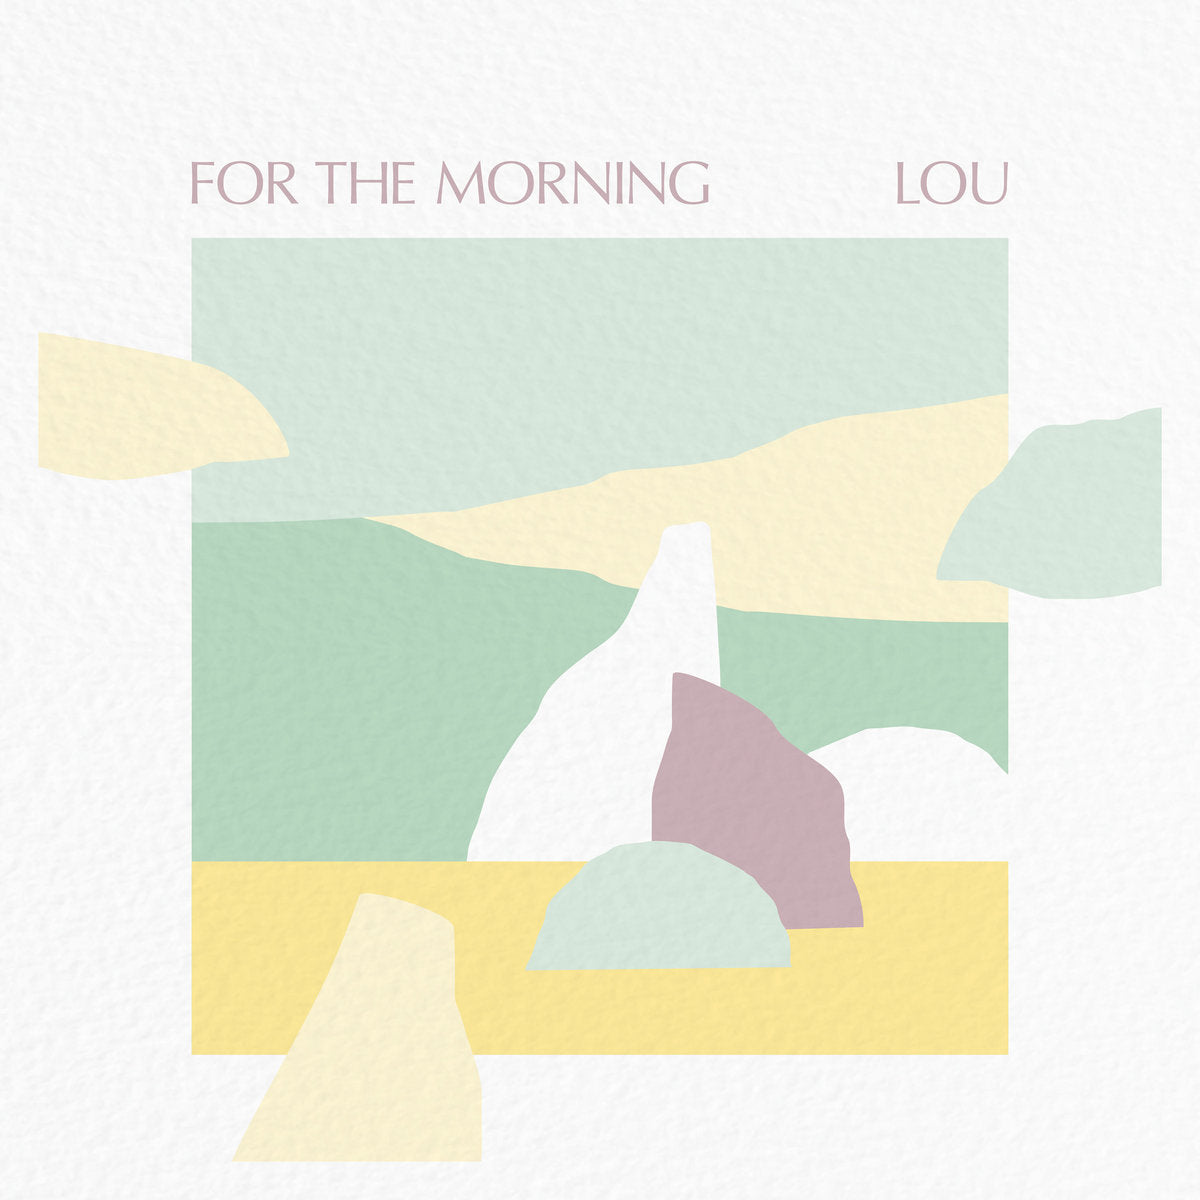 LOU - "FOR THE MORNING" LP